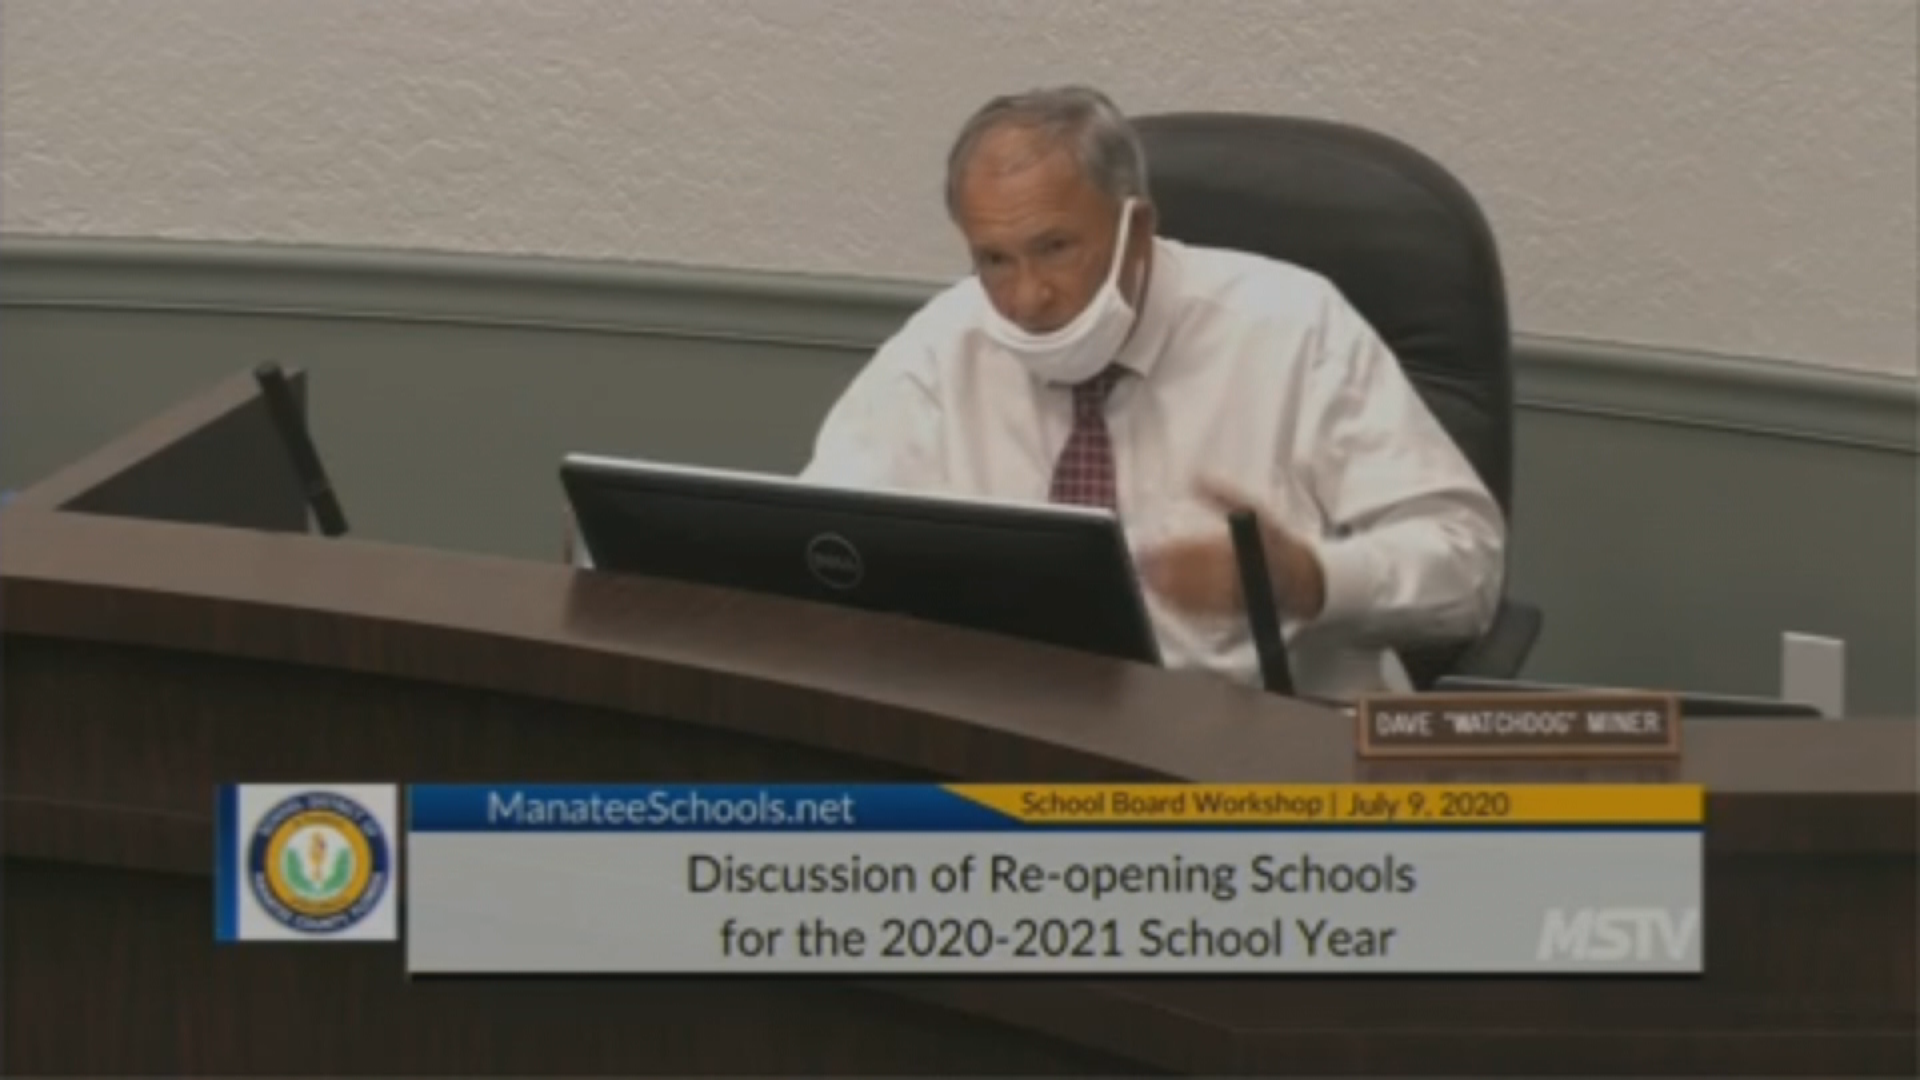 Manatee School Board Members discuss the plans for reopening schools this fall.